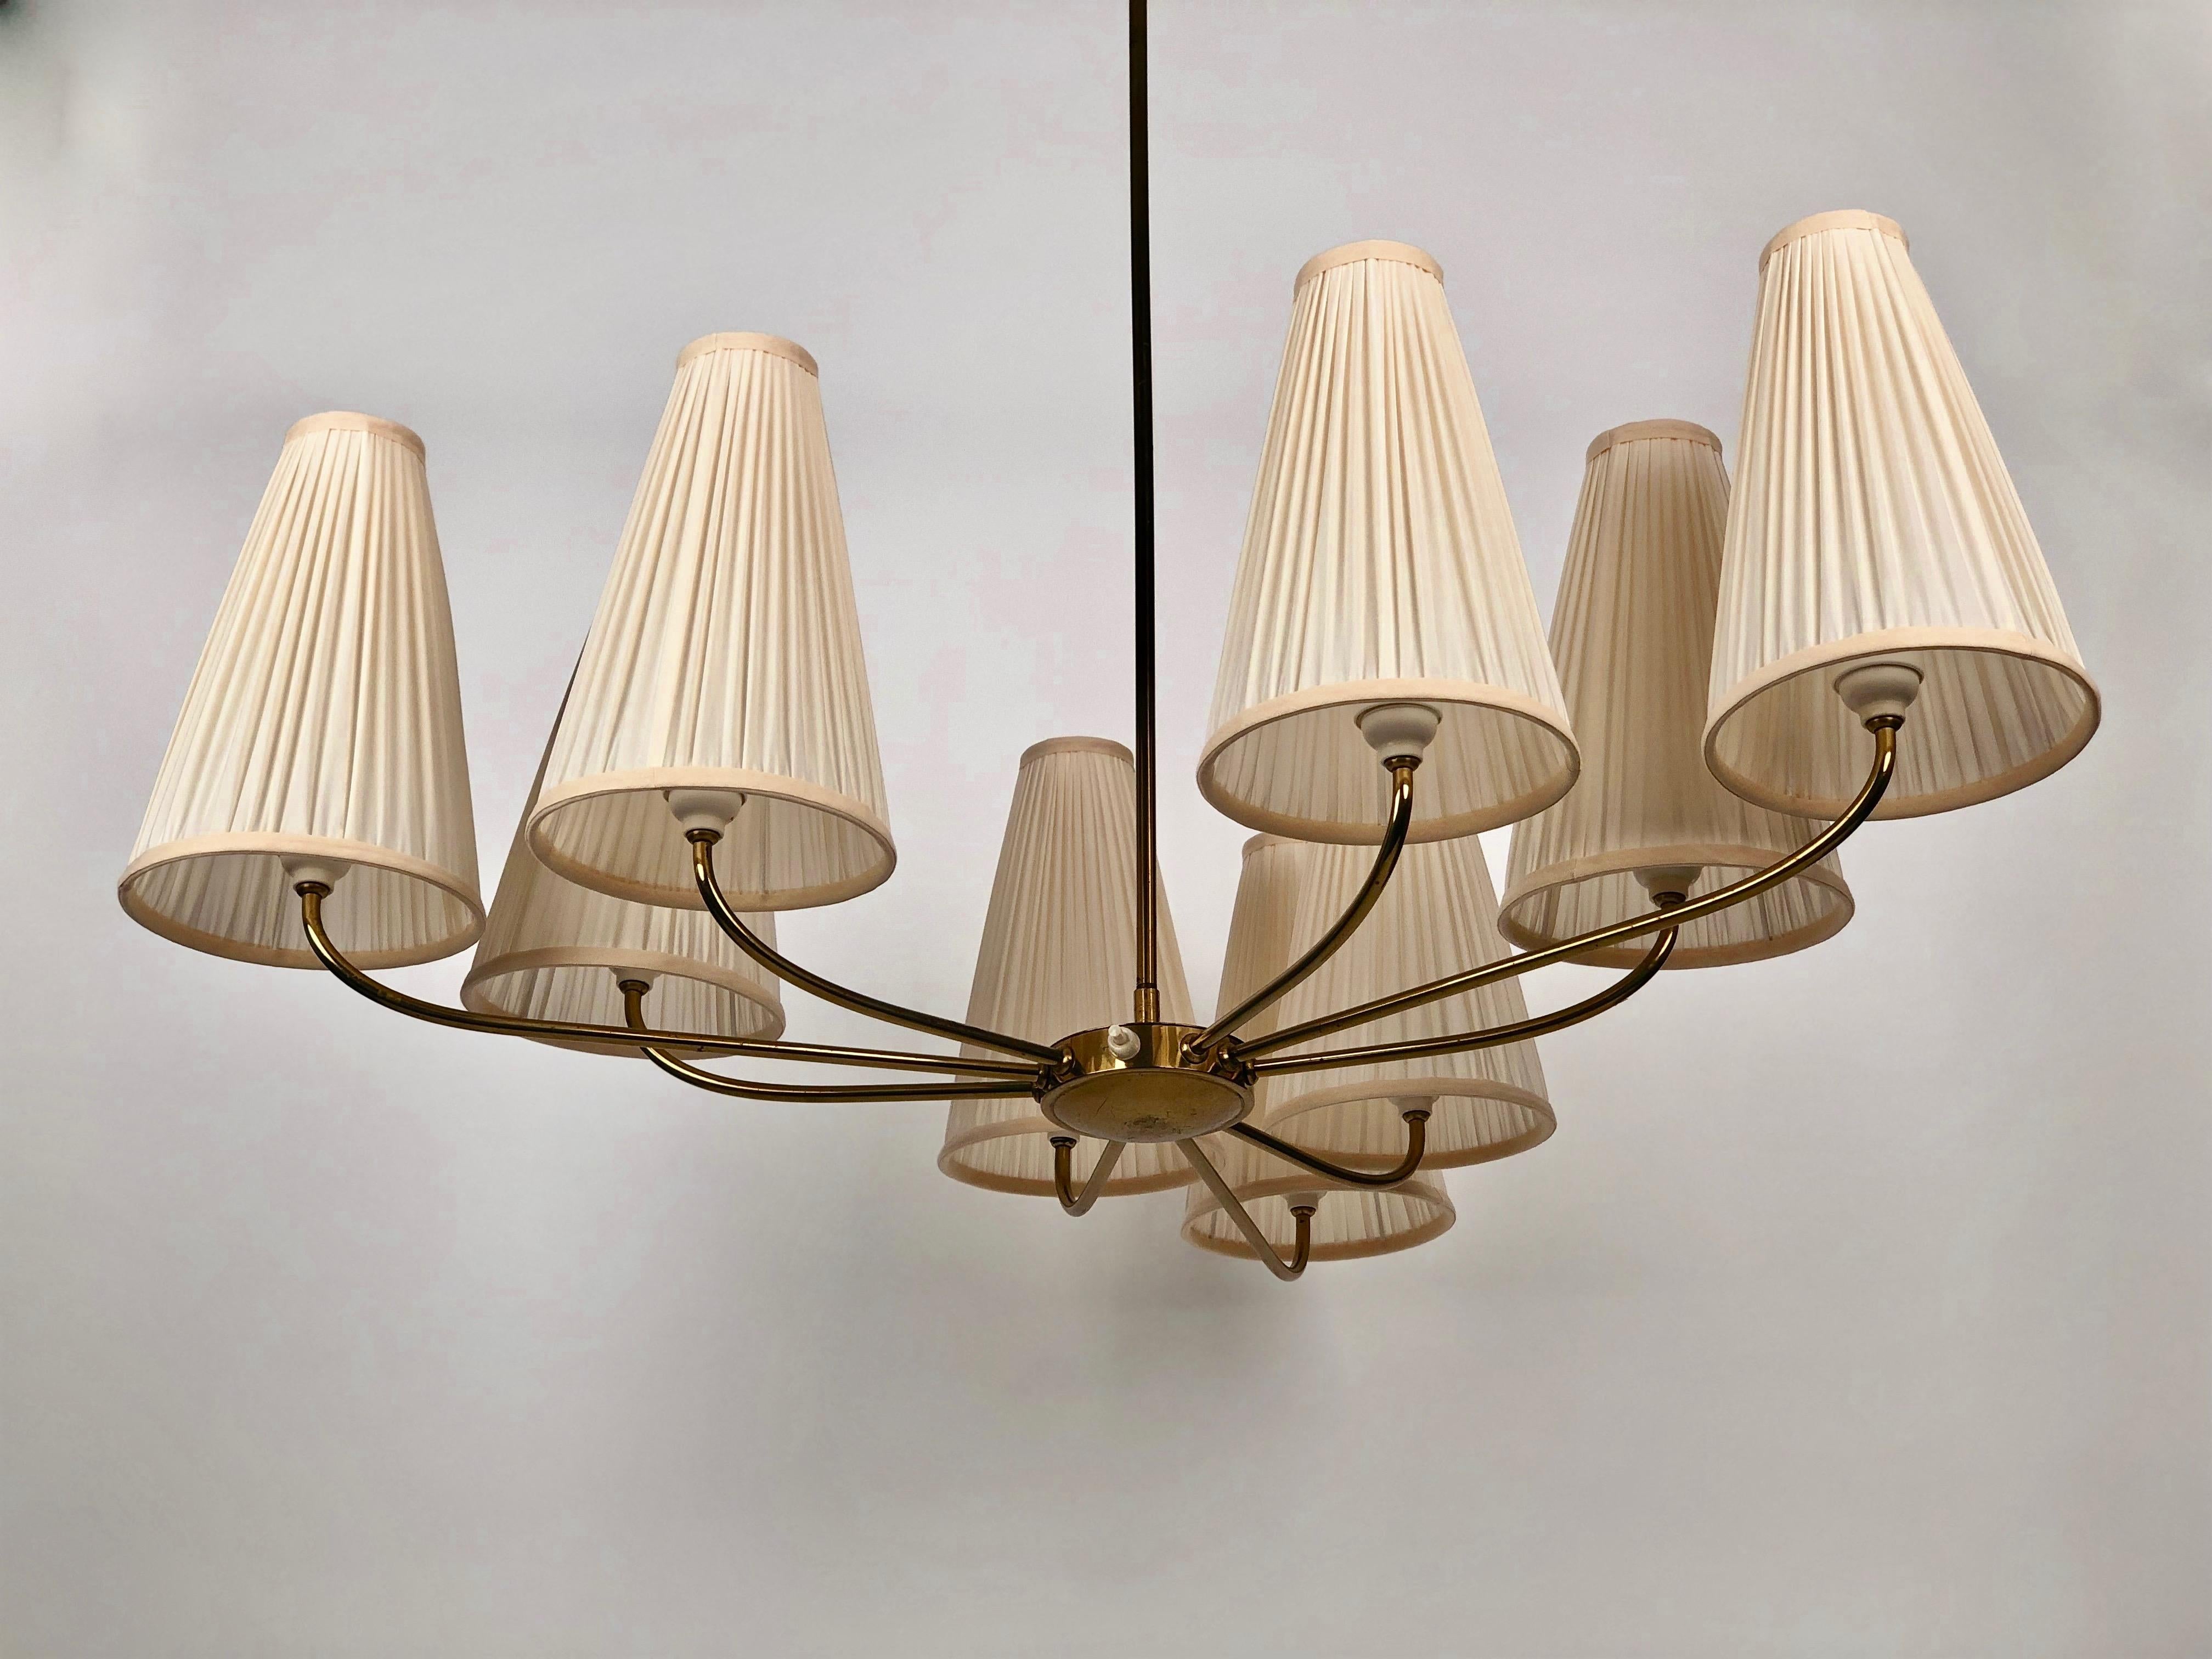 An unusual chandelier in oval form with nine brass arms and silk shades in cream colour. The shades are new based on the original forms.

The electric has been controlled.